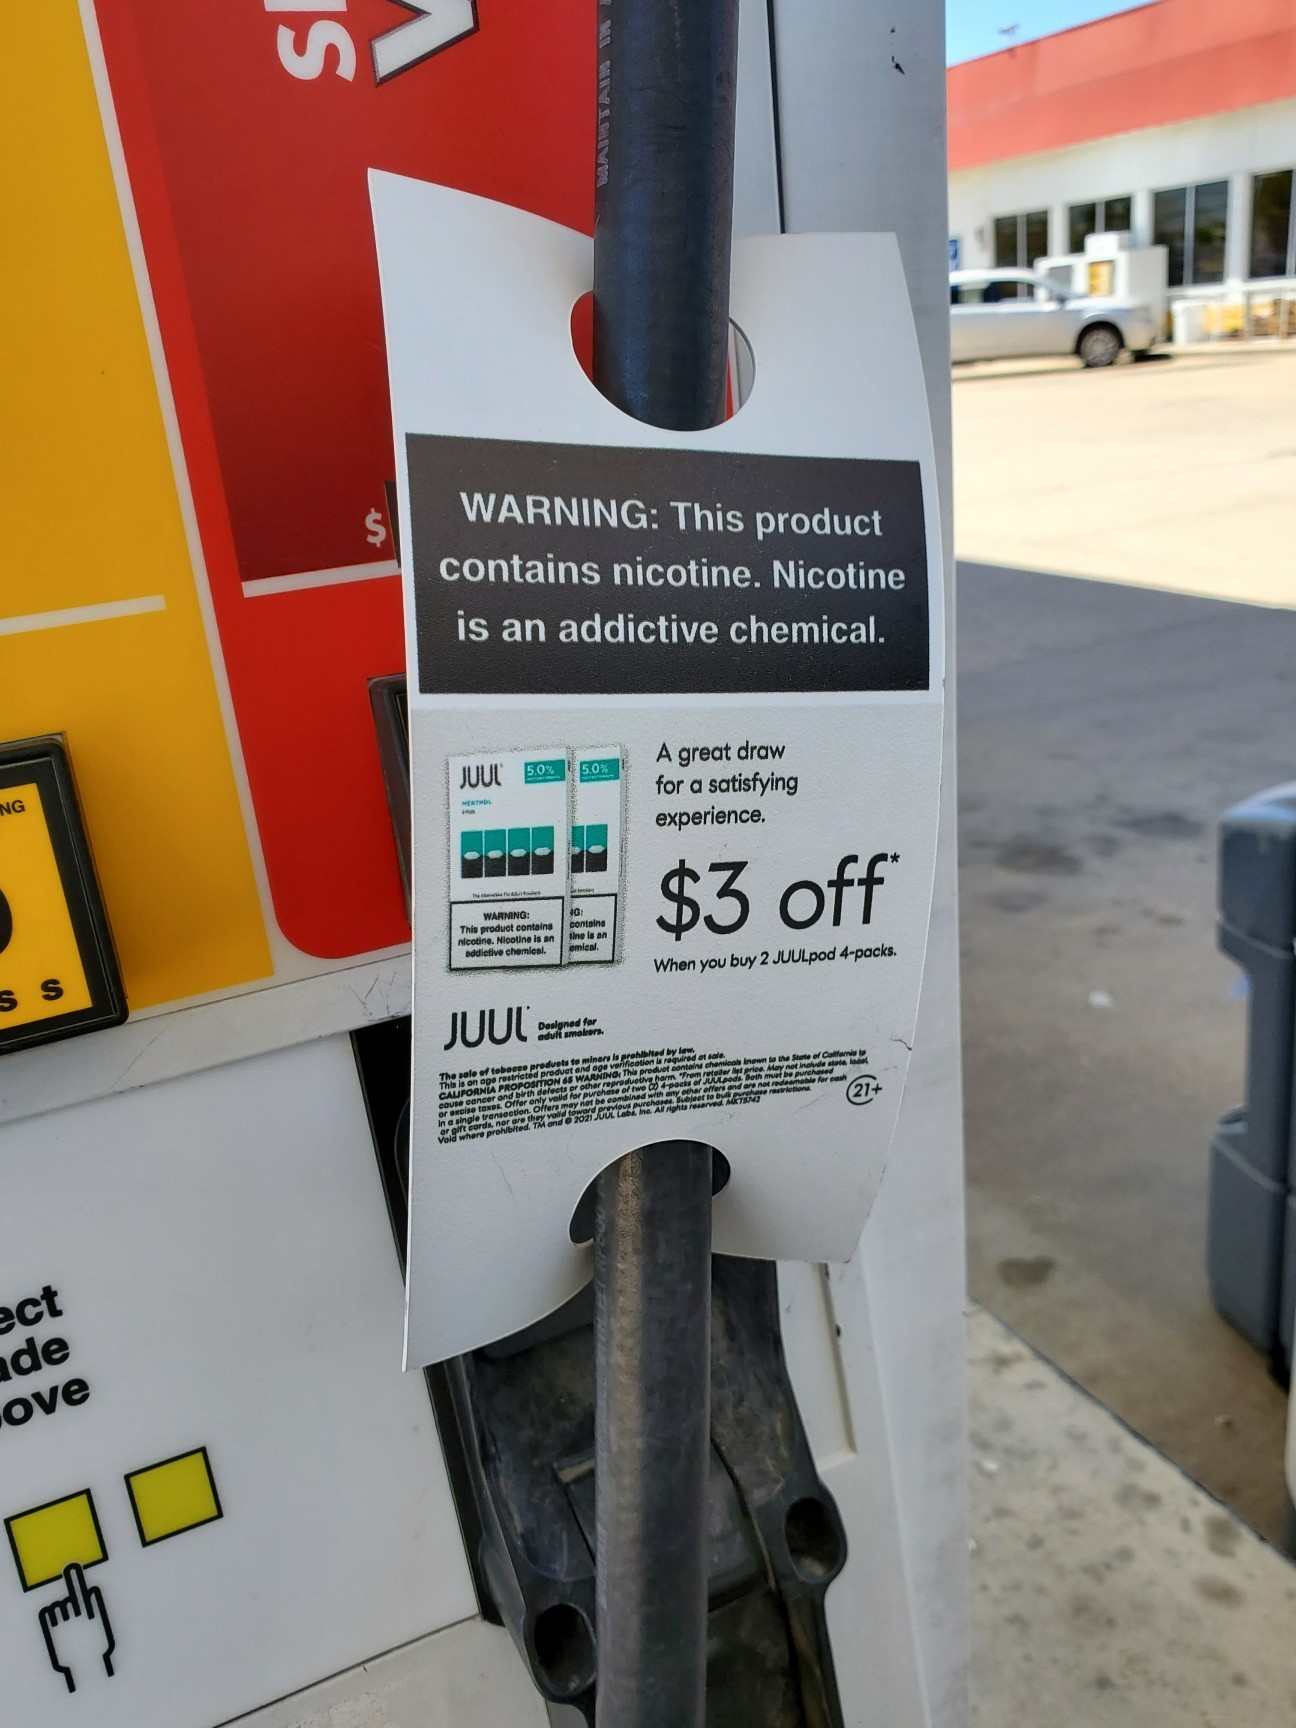 advertisement at gas pump for $3 off Juul